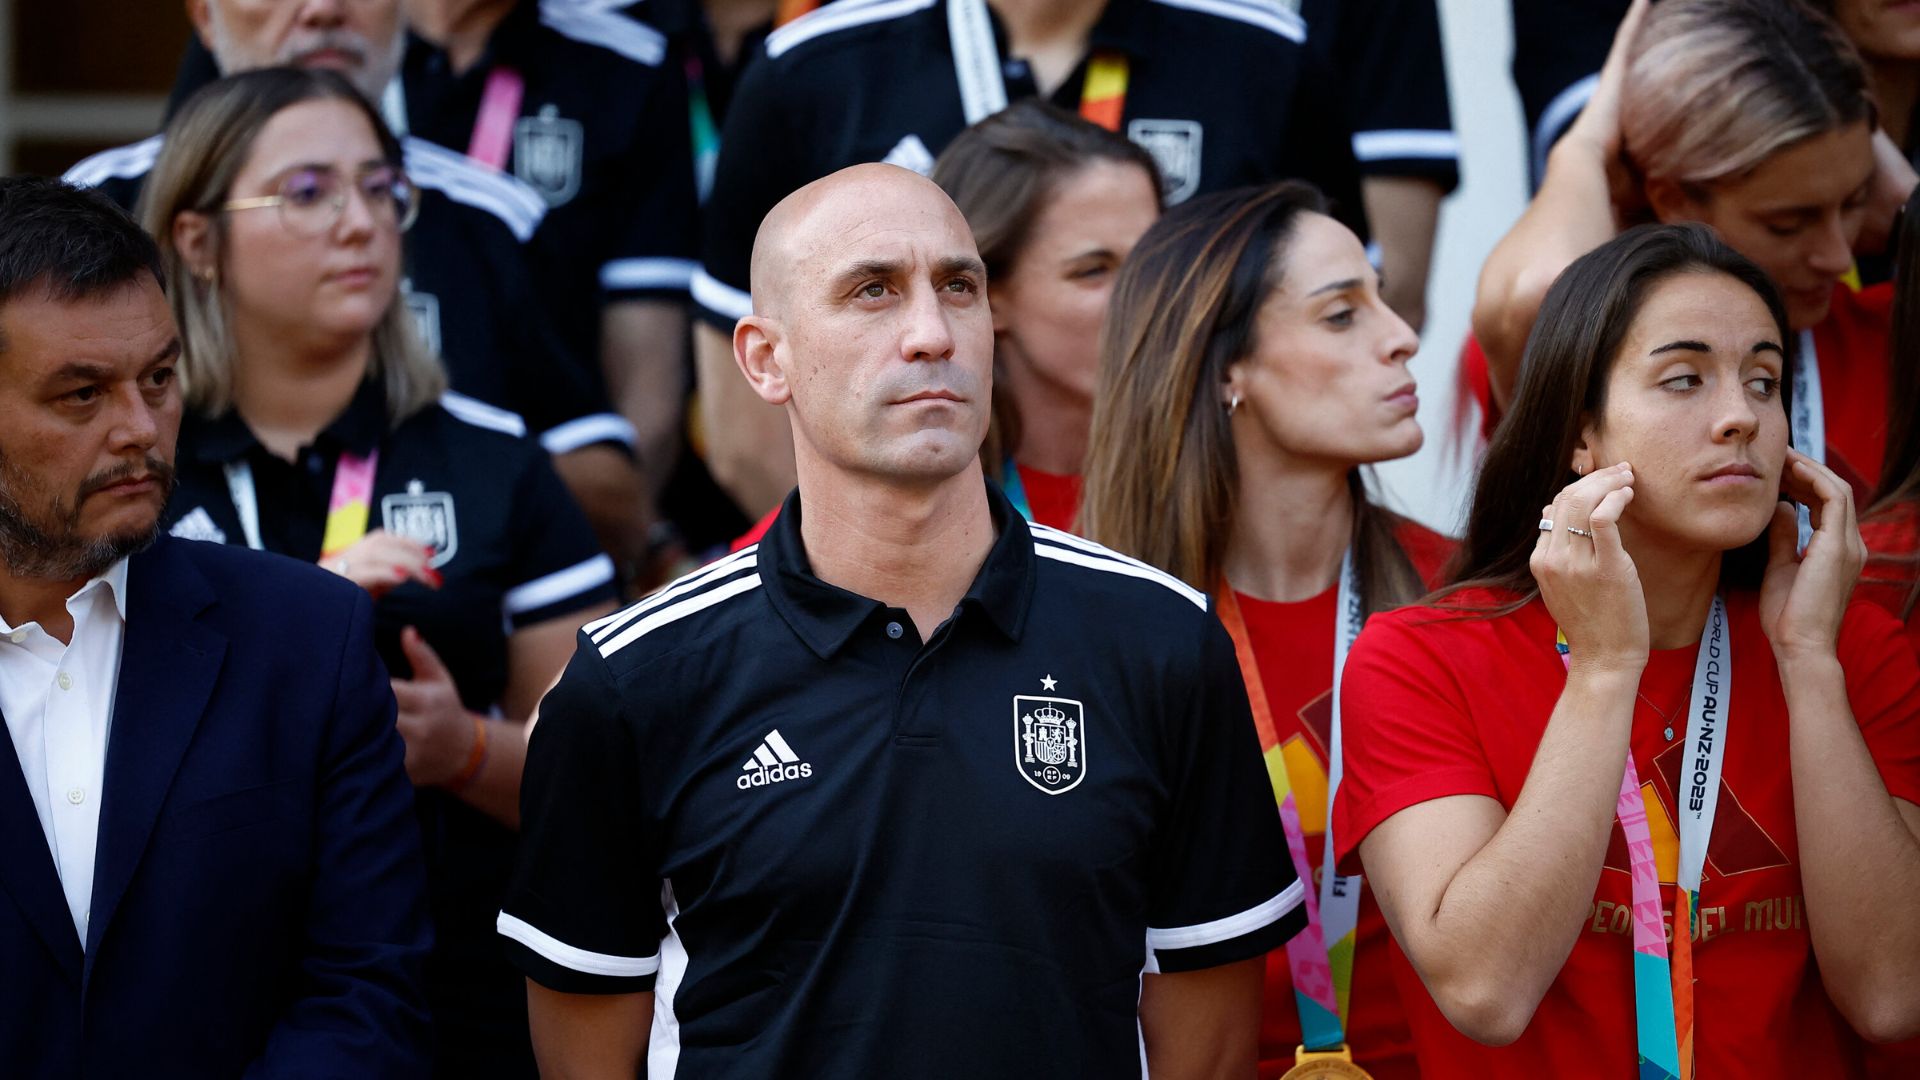 Spanish Soccer President Luis Rubiales Resigns Amid Kissing Scandal Controversy